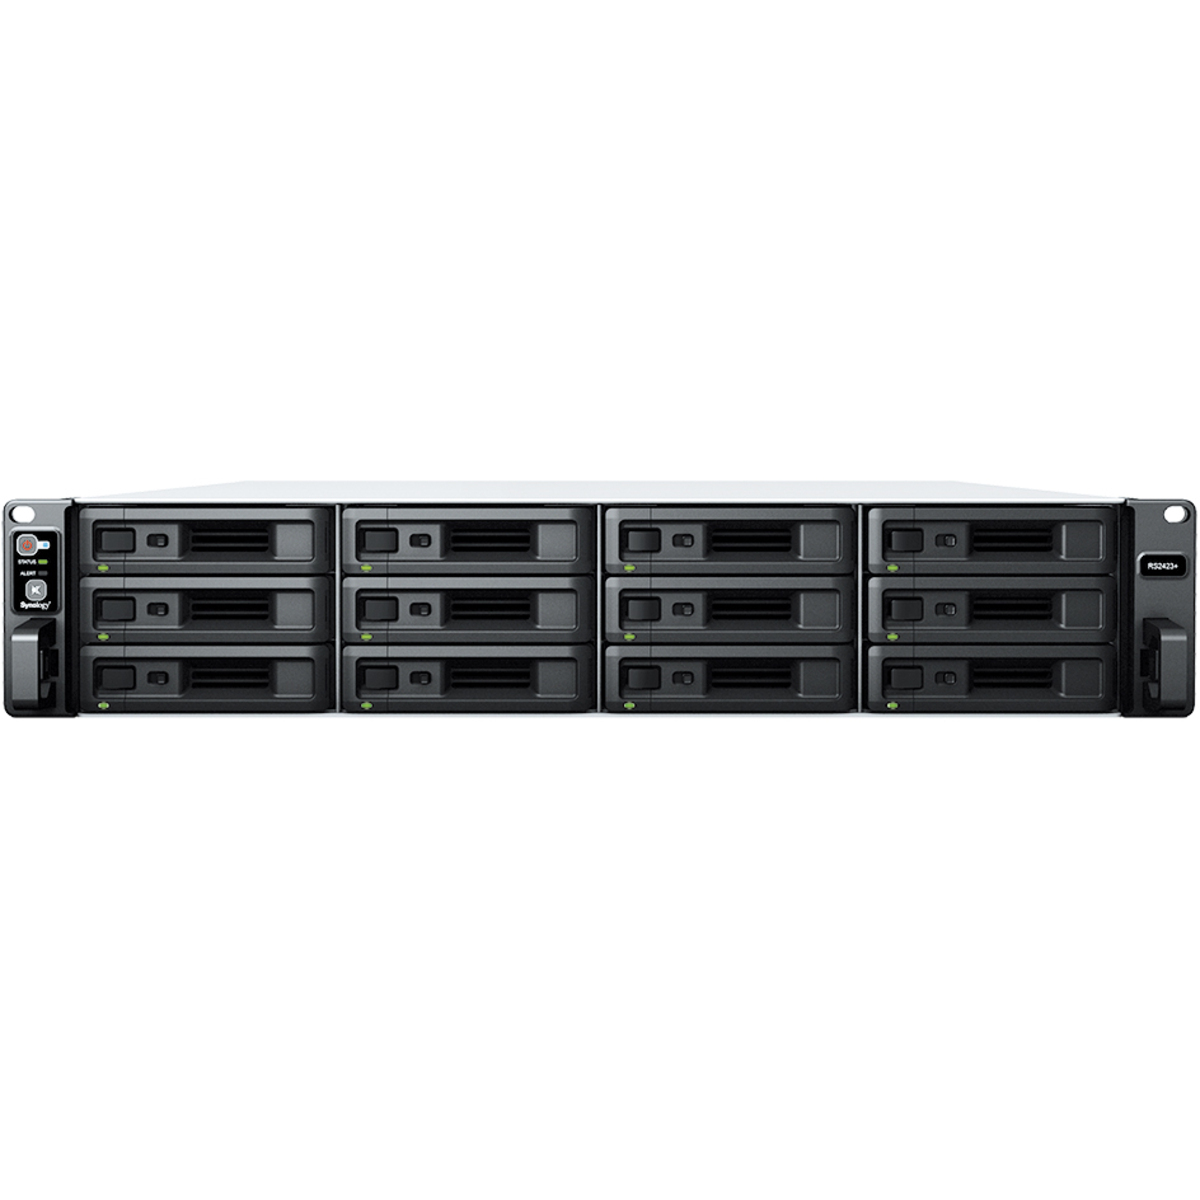 Synology RackStation RS2423RP+ 140tb 12-Bay RackMount Multimedia / Power User / Business NAS - Network Attached Storage Device 10x14tb Western Digital Red Pro WD142KFGX 3.5 7200rpm SATA 6Gb/s HDD NAS Class Drives Installed - Burn-In Tested - FREE RAM UPGRADE RackStation RS2423RP+